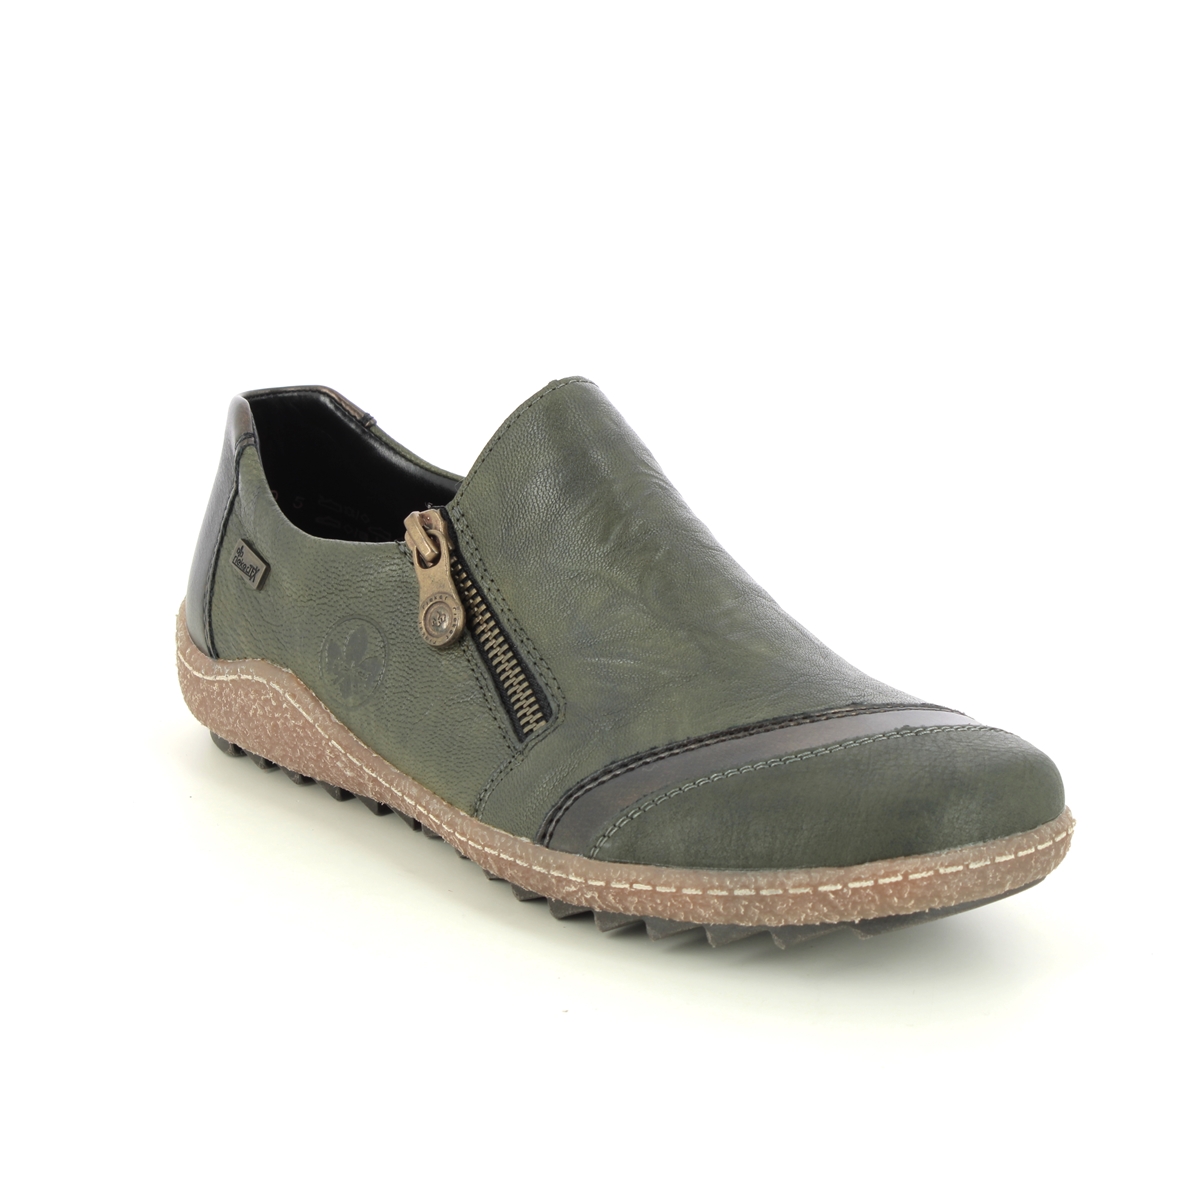 Rieker Zigshu Tex Olive Leather Womens Comfort Slip On Shoes L7571-54 In Size 41 In Plain Olive Leather